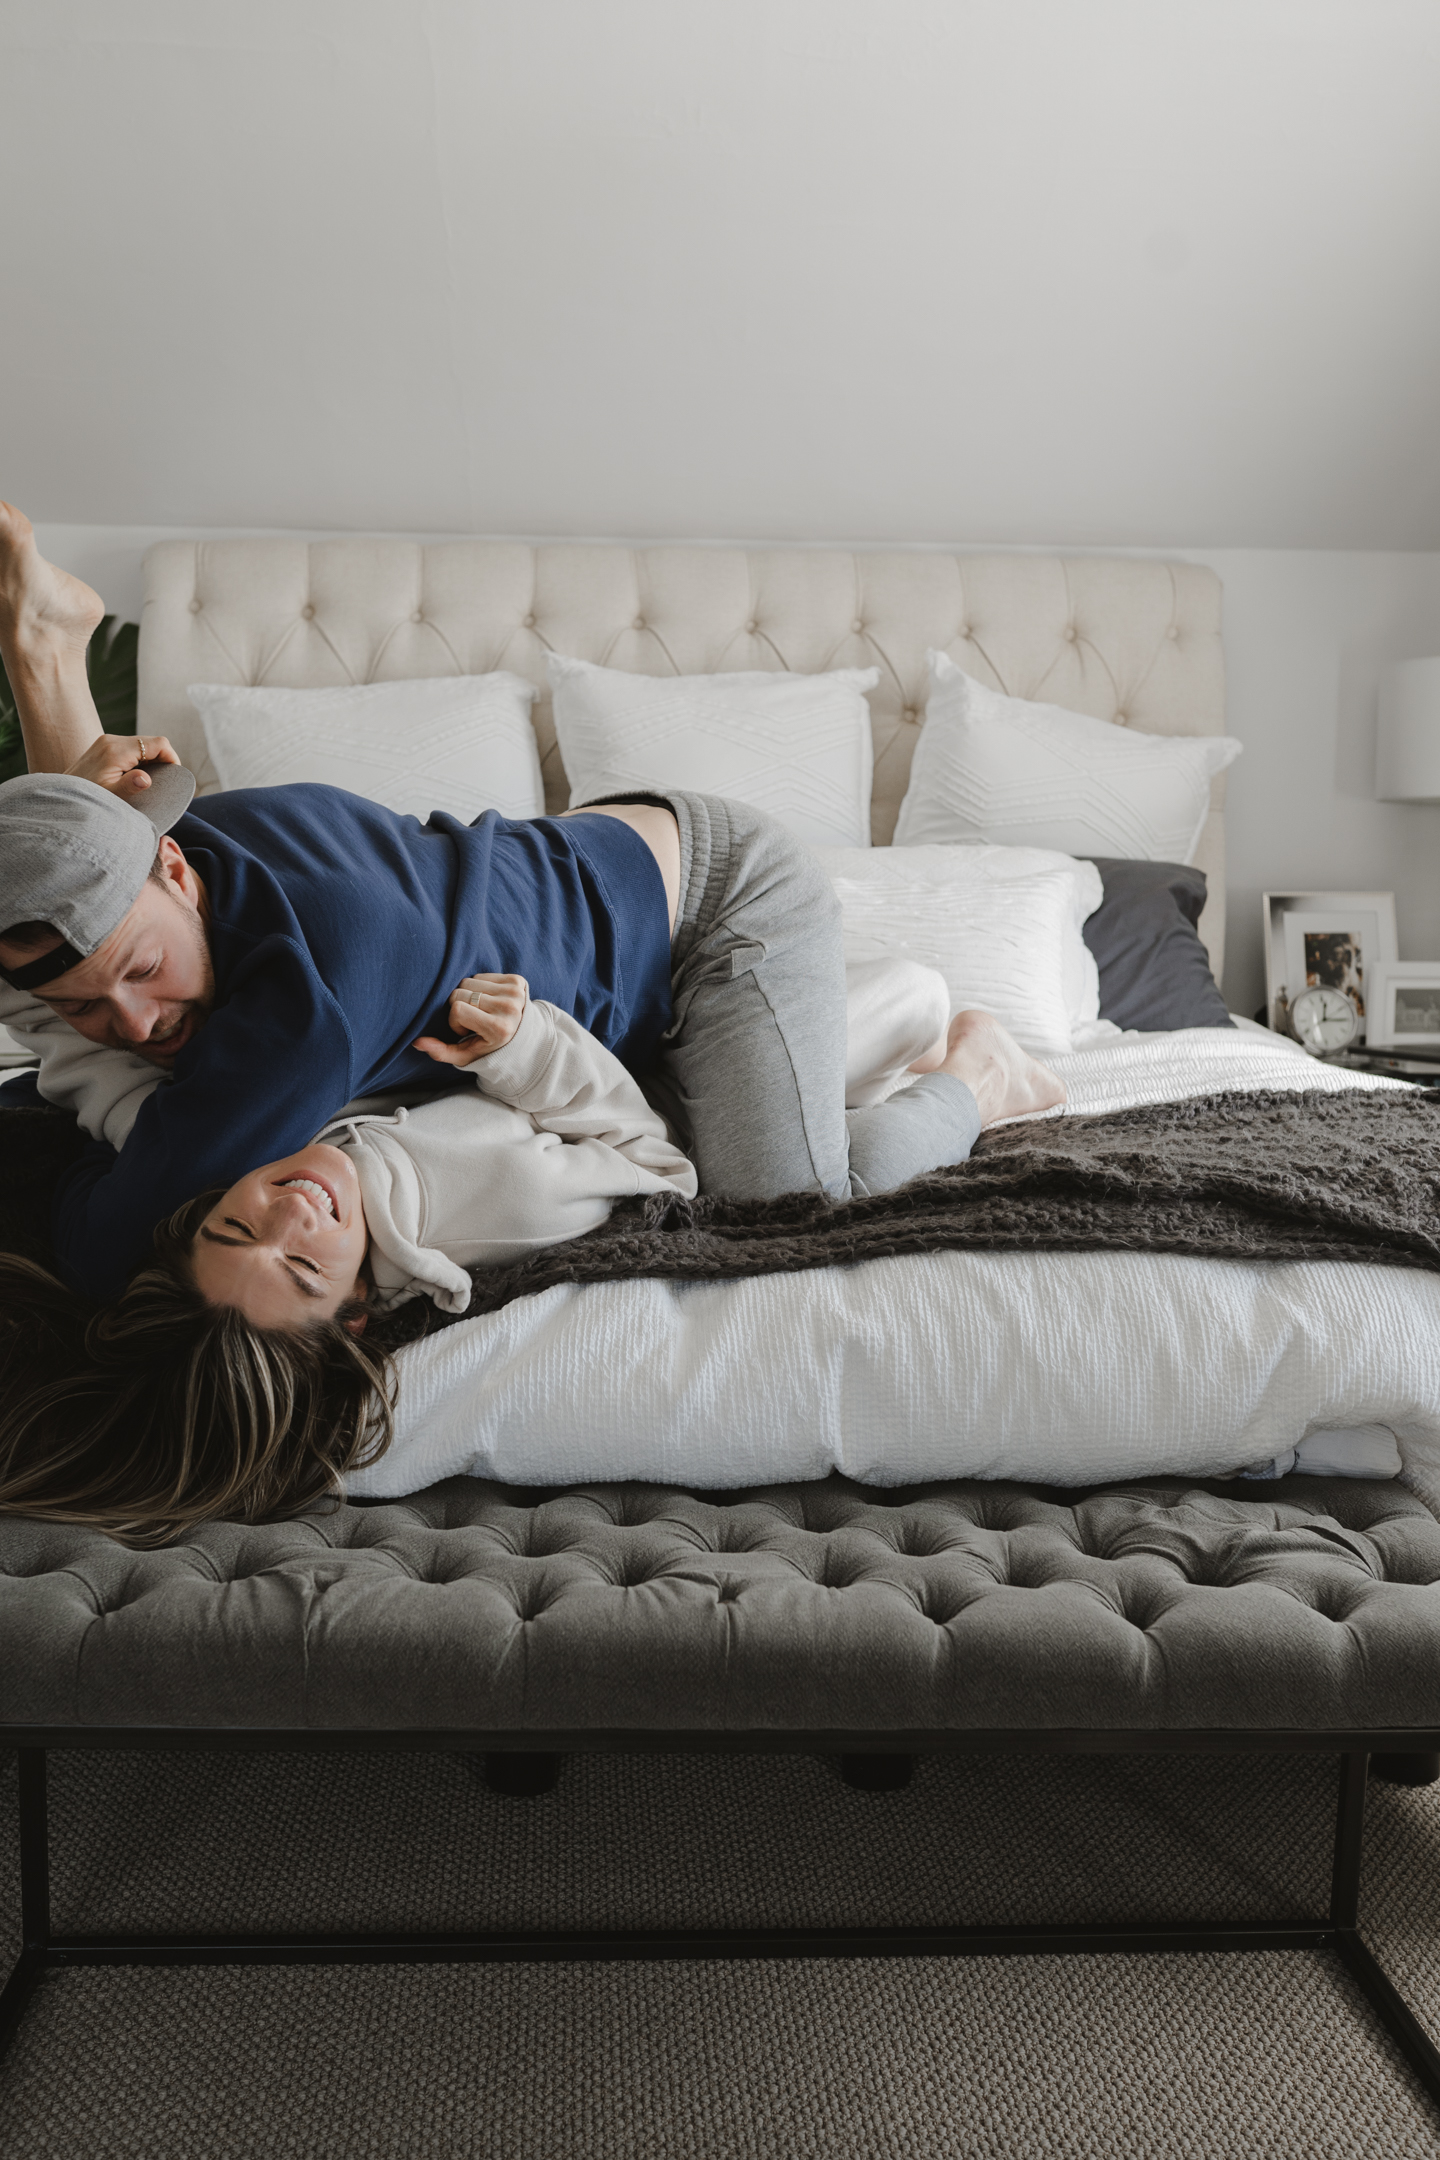 The Grey Edit - Seattle Lifestyle Blogger - How to Make It Through Quarantine with Your Significant Other - Relationship Tips - Husband and Wife